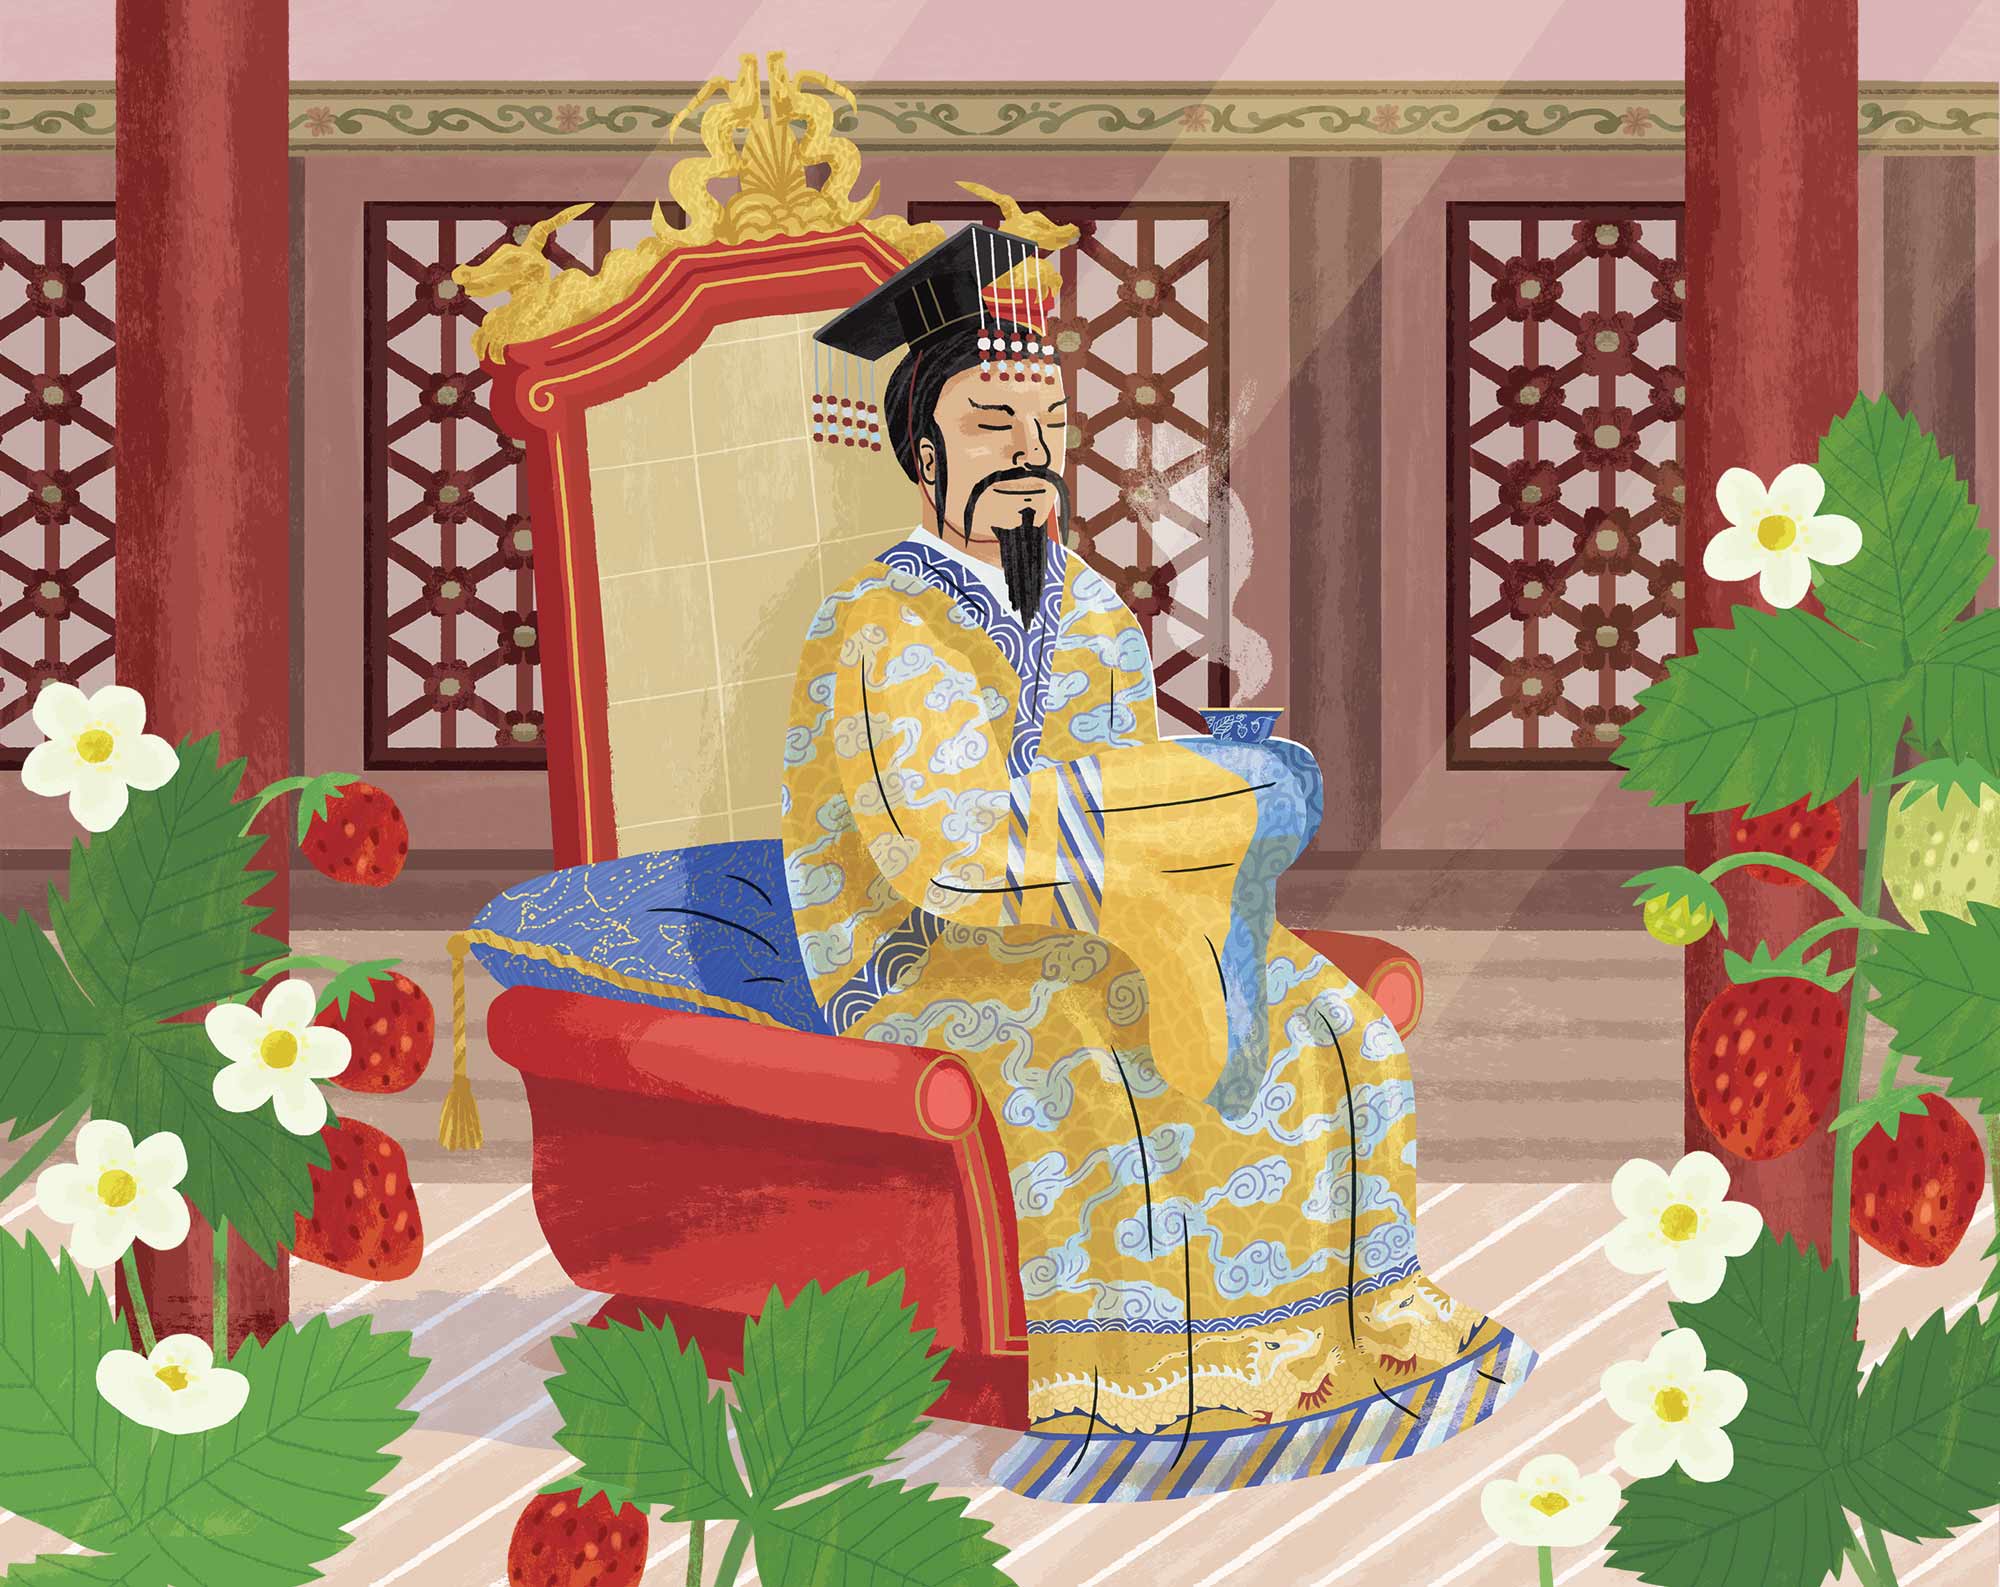 Strawberry Tea for the Yellow Emperor from Foraging: The Complete Guide for Kids and Families illustrated by Elly Jahnz